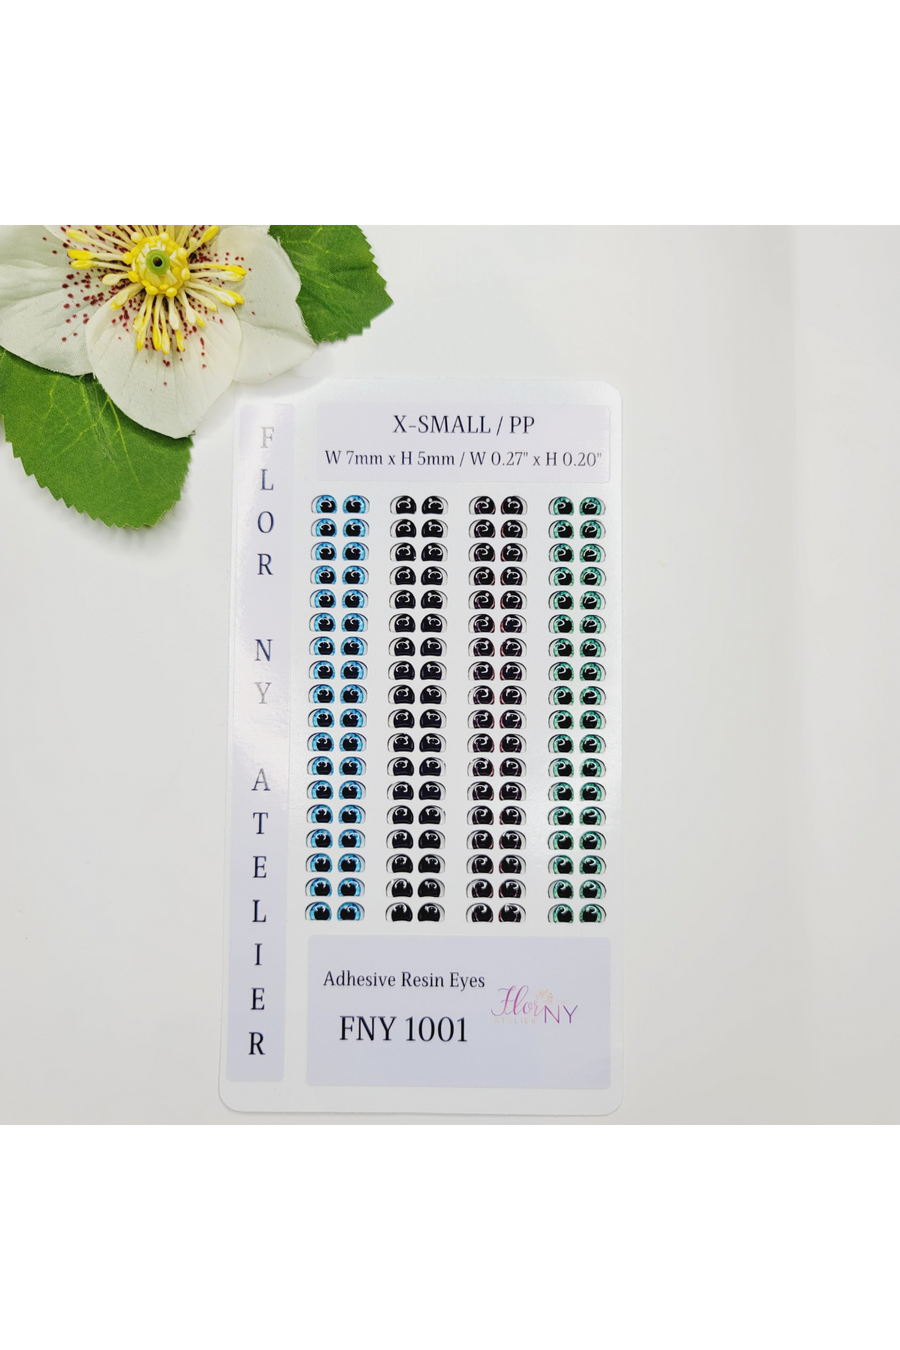 Adhesive Resin Eyes Card FNY 1001 - 72 Pairs - XSmall/PP W/H 7mmx5mm (0.27"x0.20") - for use with Cold Porcelain Air Dry Clay, Polymer Clay, EVA, Felt, Fabric, Plaster, Paper, Ceramic and more